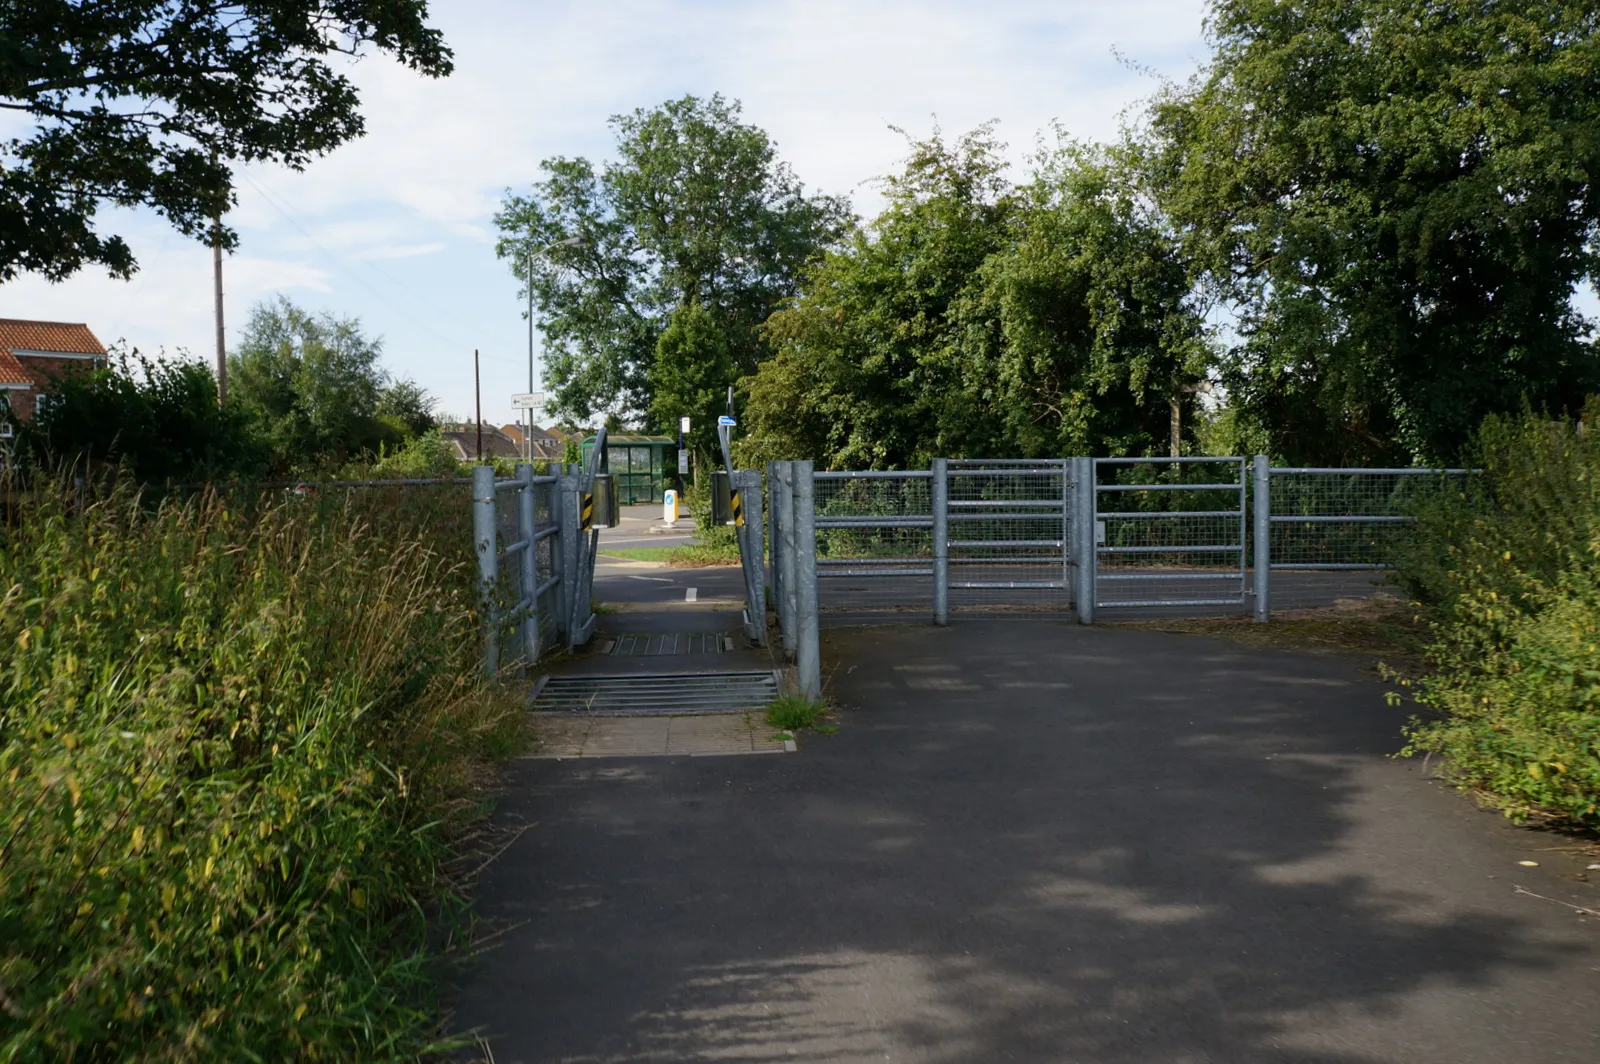 Photo showing: Cycleway leading to Fulford, York